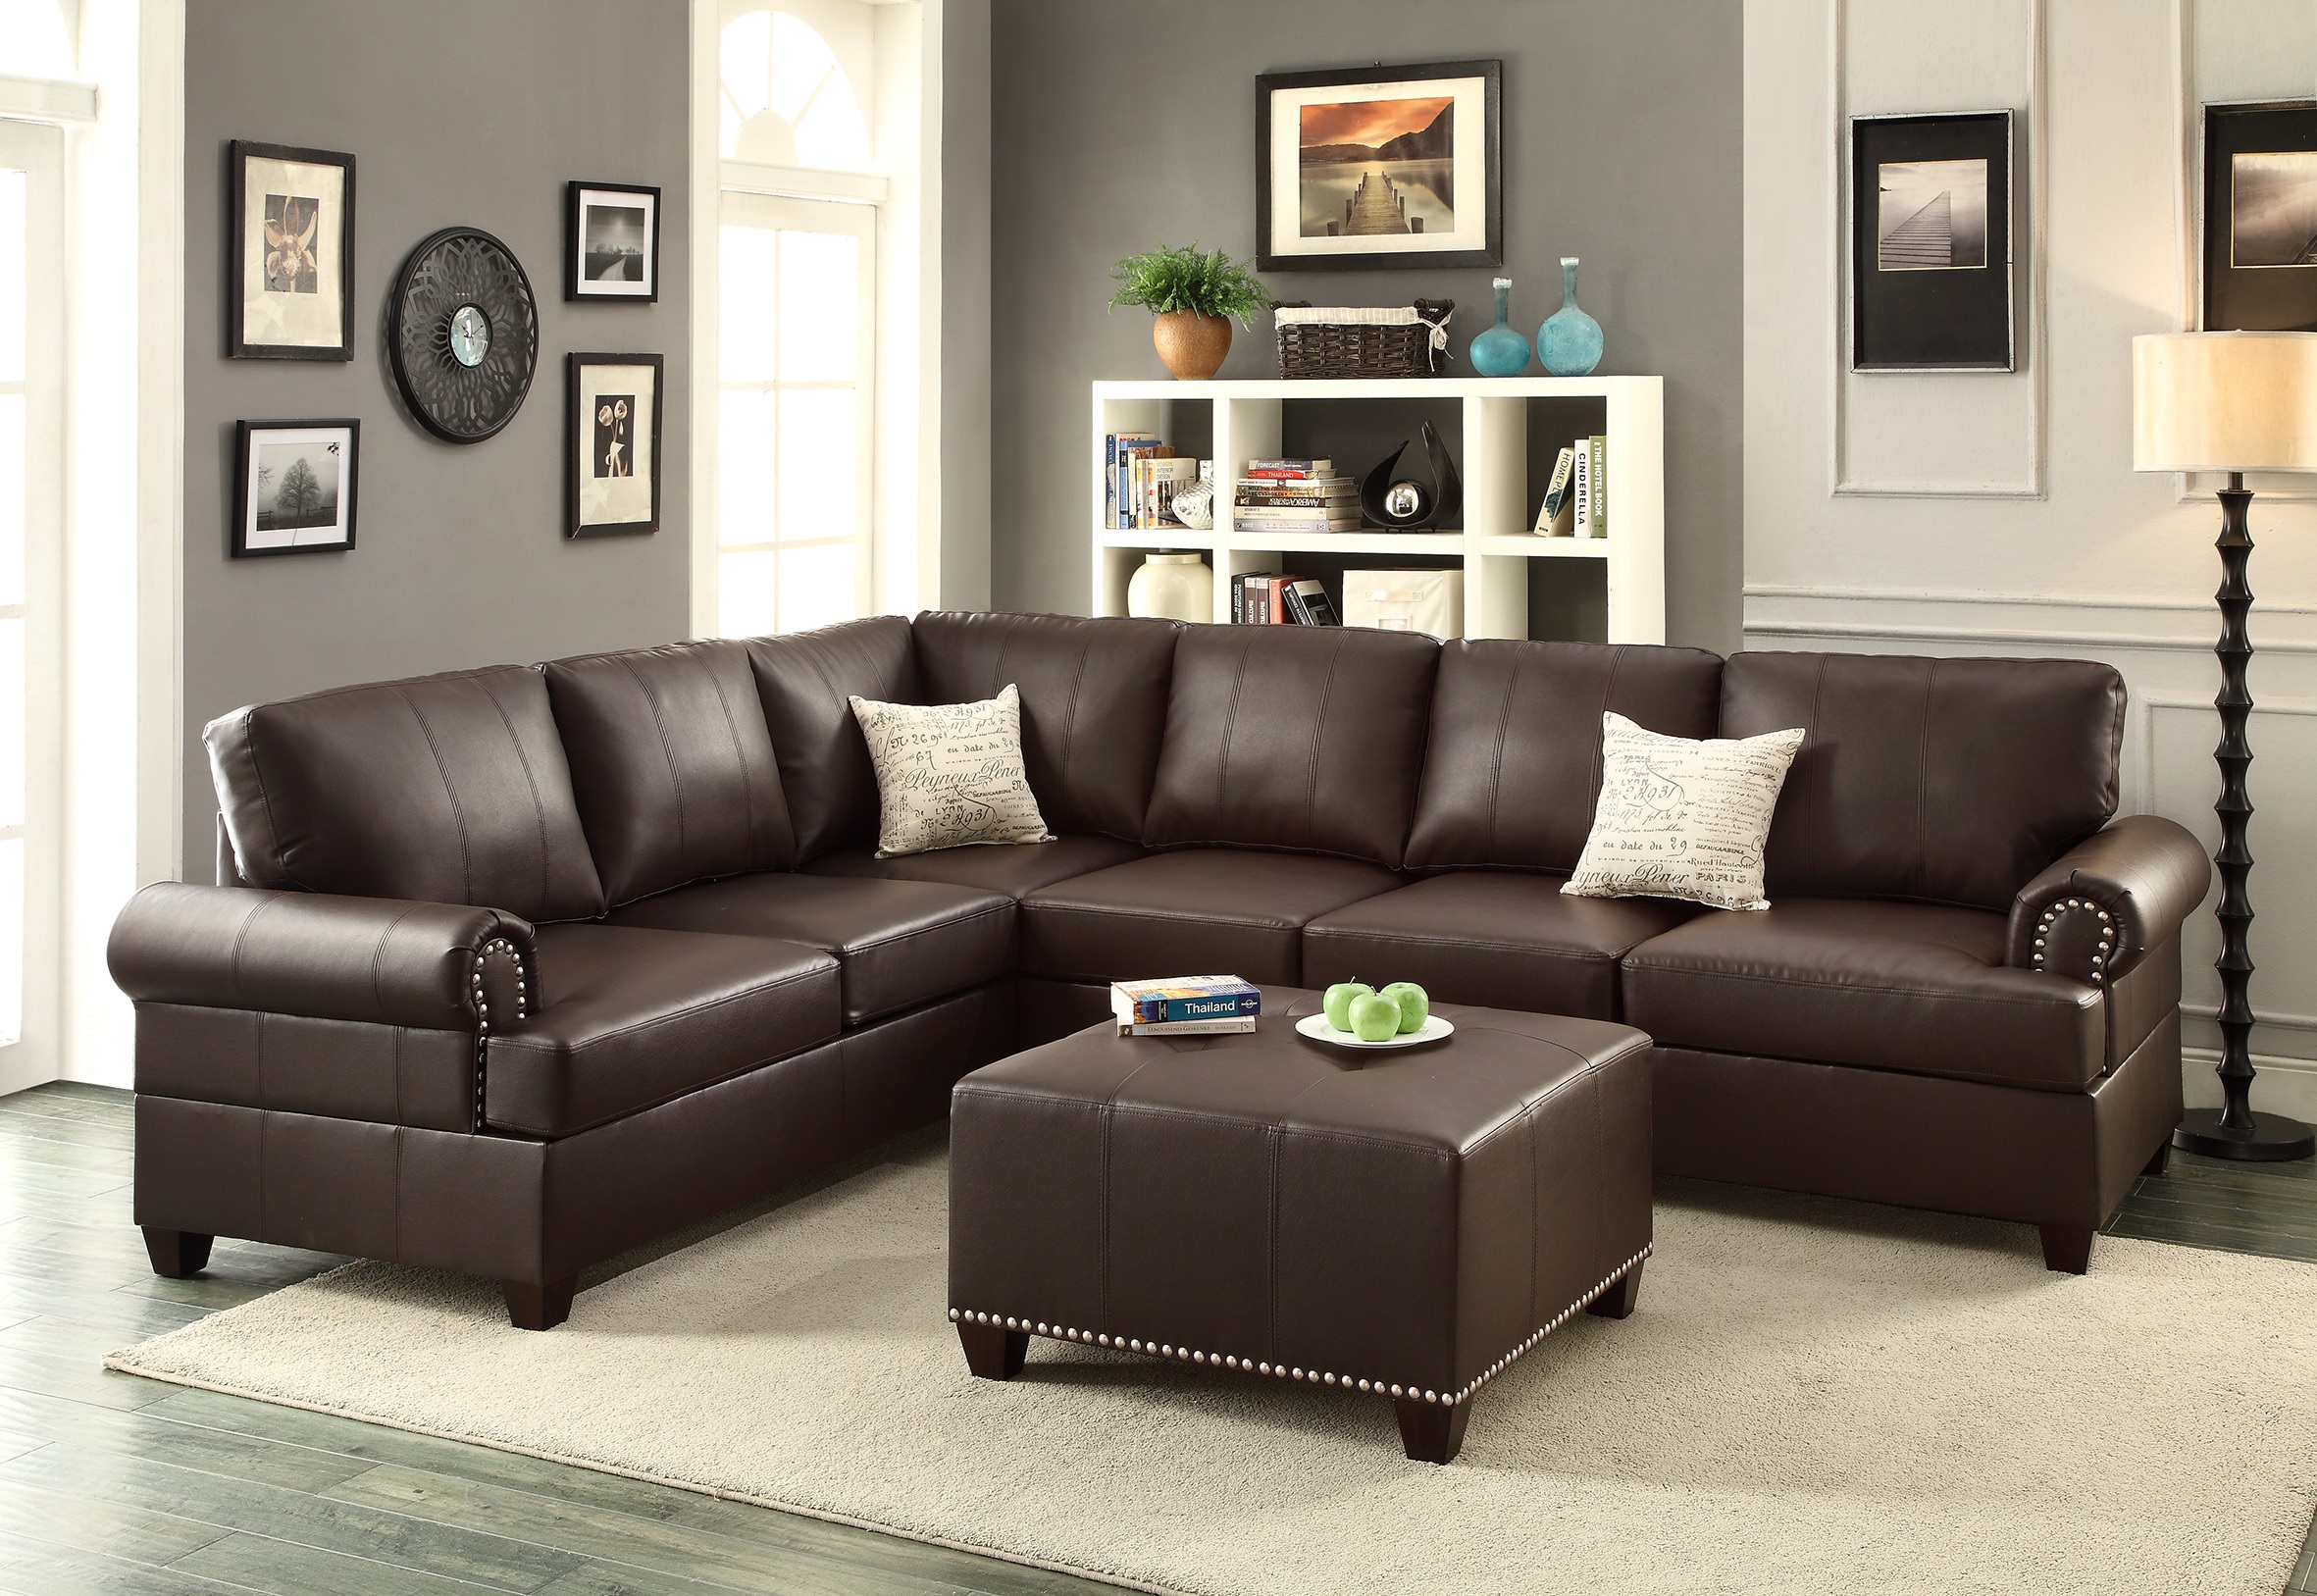 Espresso Sectional 2pc Sofa Set Living Room Furniture Reversible L/R Loveseat Wedge Sofa Couch Pillows Nailhead Rolled Arms-Boyel Living